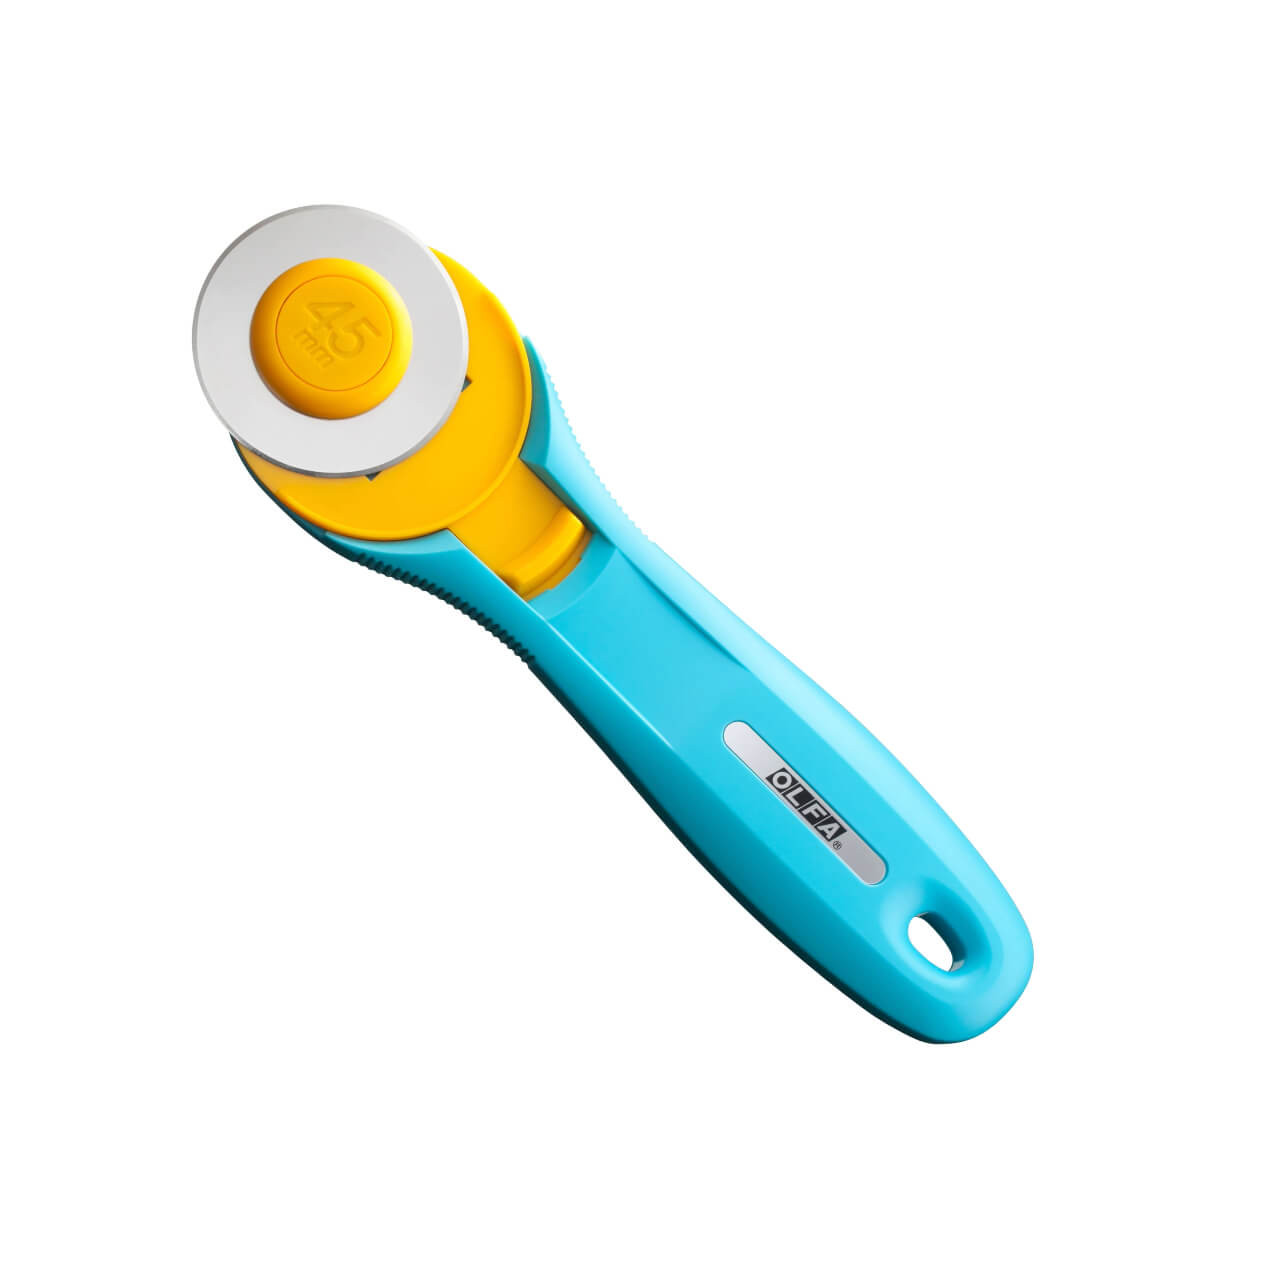 OLFA 45mm Quick-Change Rotary Cutter with an aqua handle, yellow grip, and silver blade. Pictured with safety pulled back.